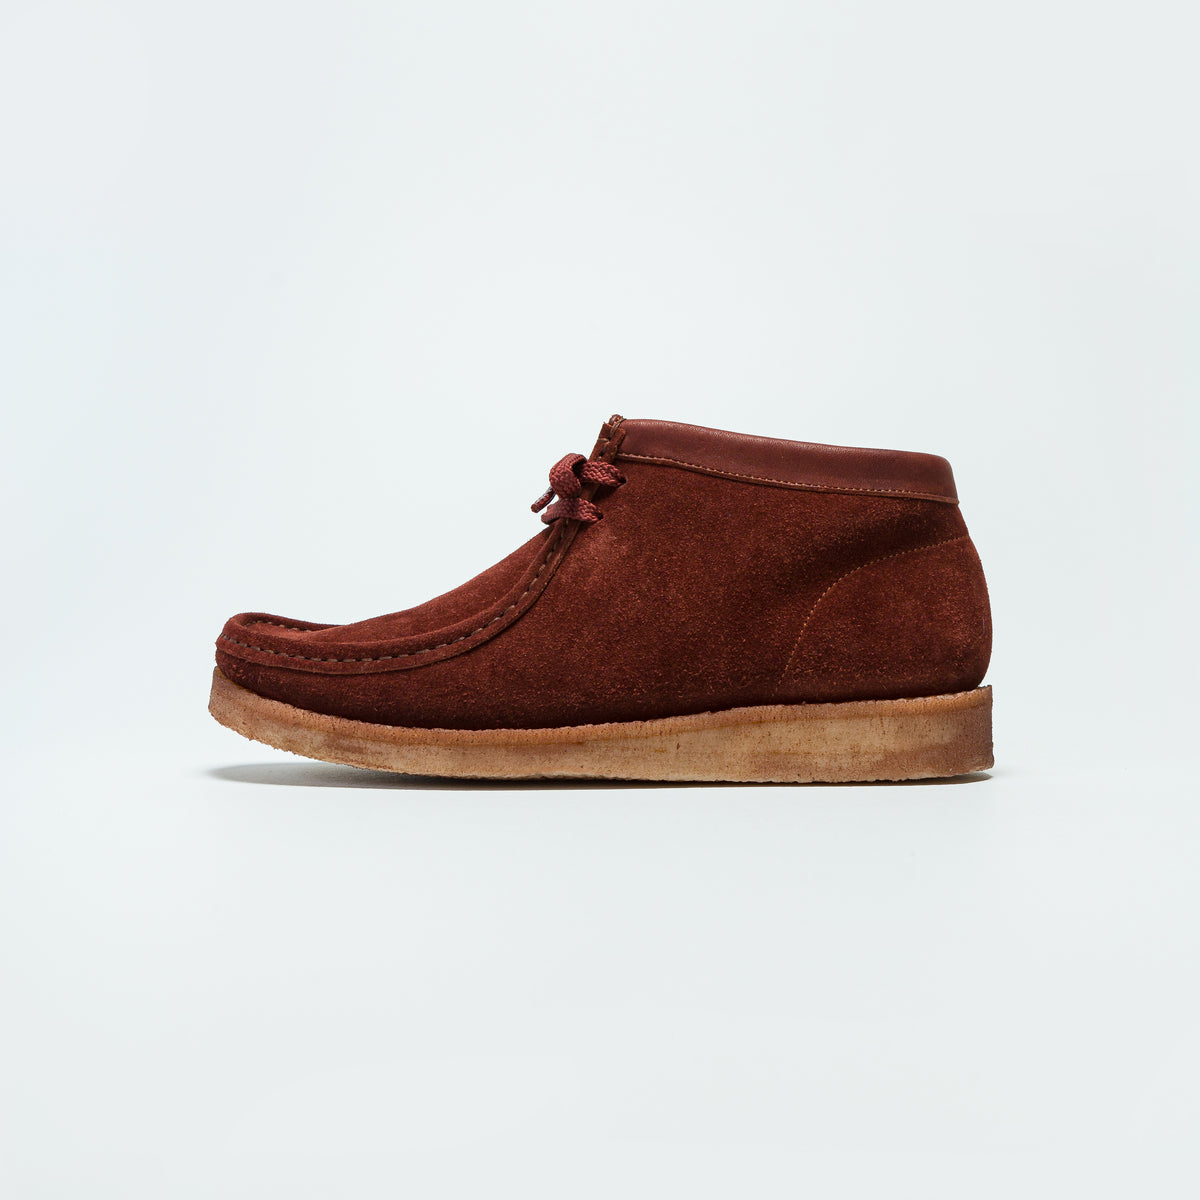 Padmore & Barnes Footwear | UP THERE